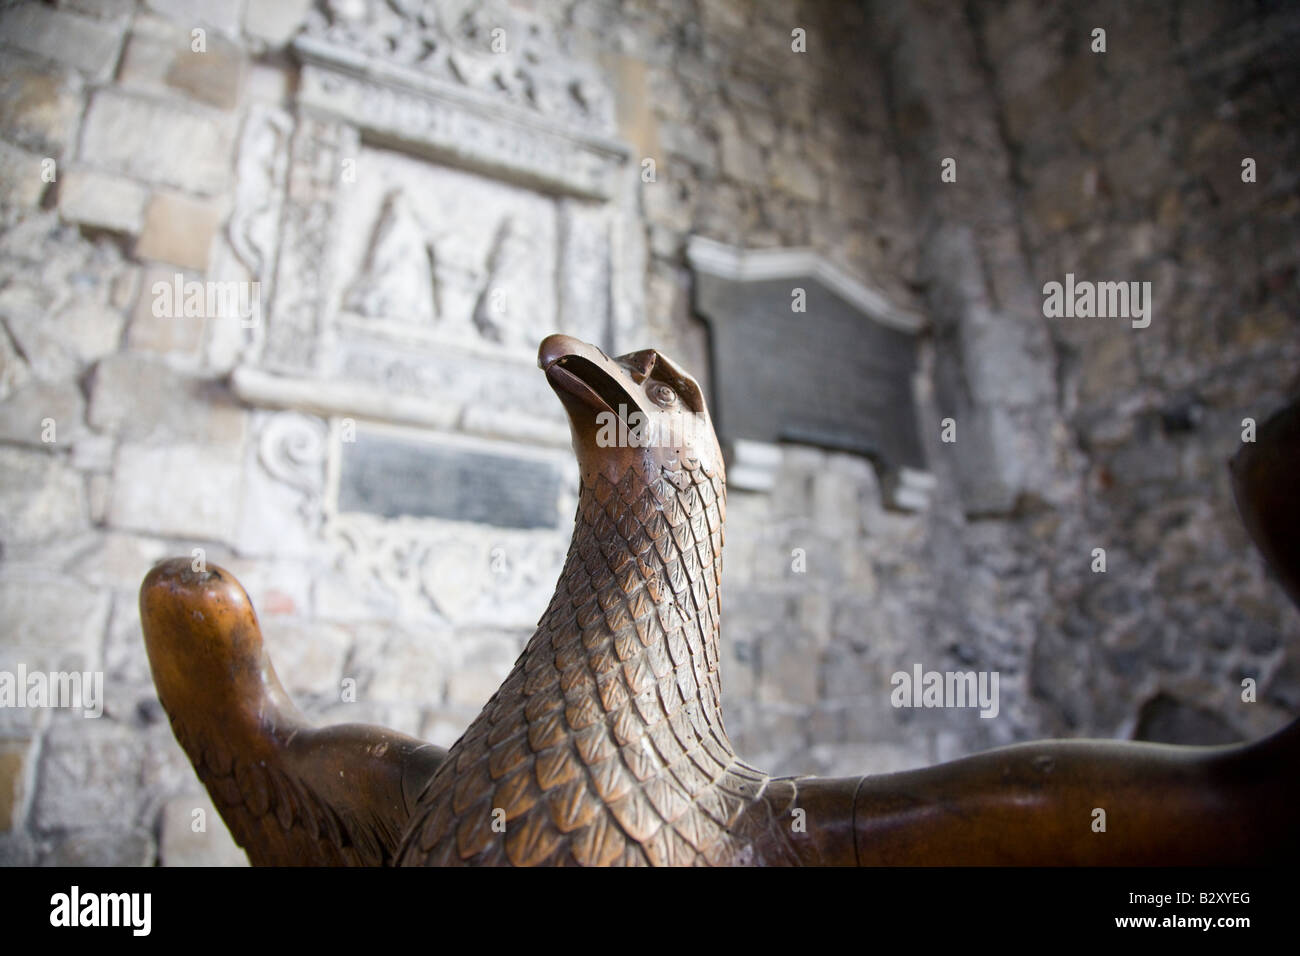 Carved wooden eagle lectern in a church Stock Photo